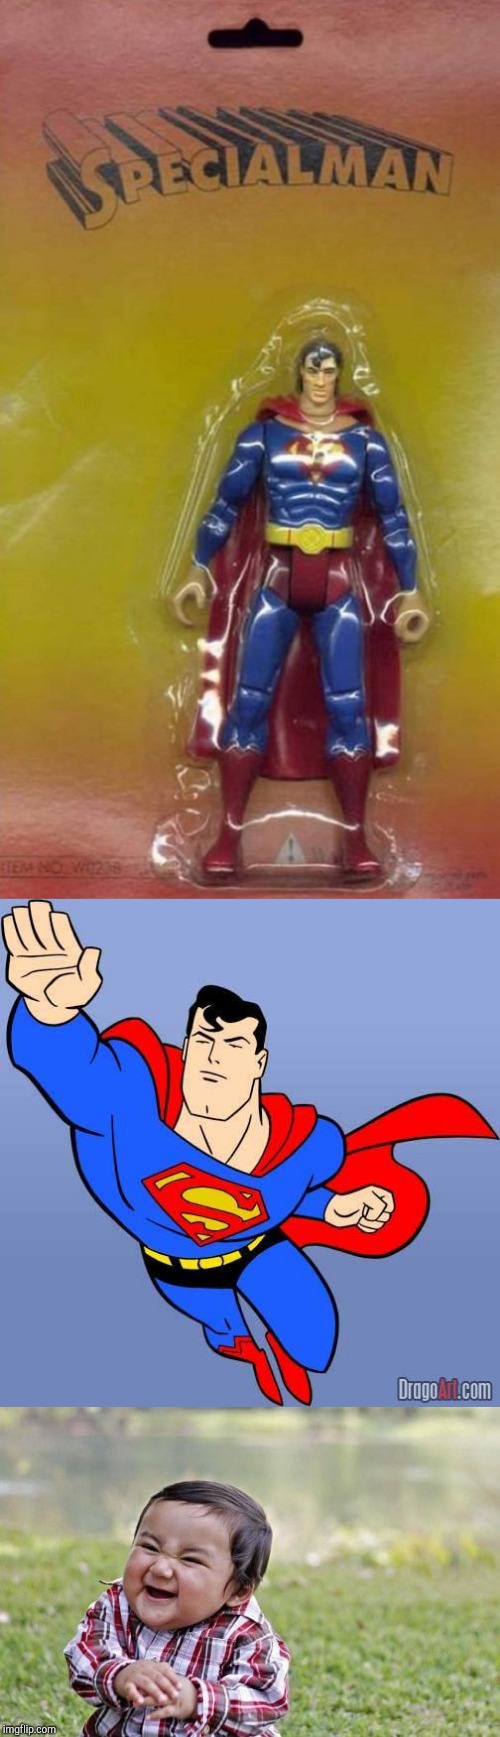 Some things are better left unspoken | image tagged in evil toddler,superman,fake toys | made w/ Imgflip meme maker